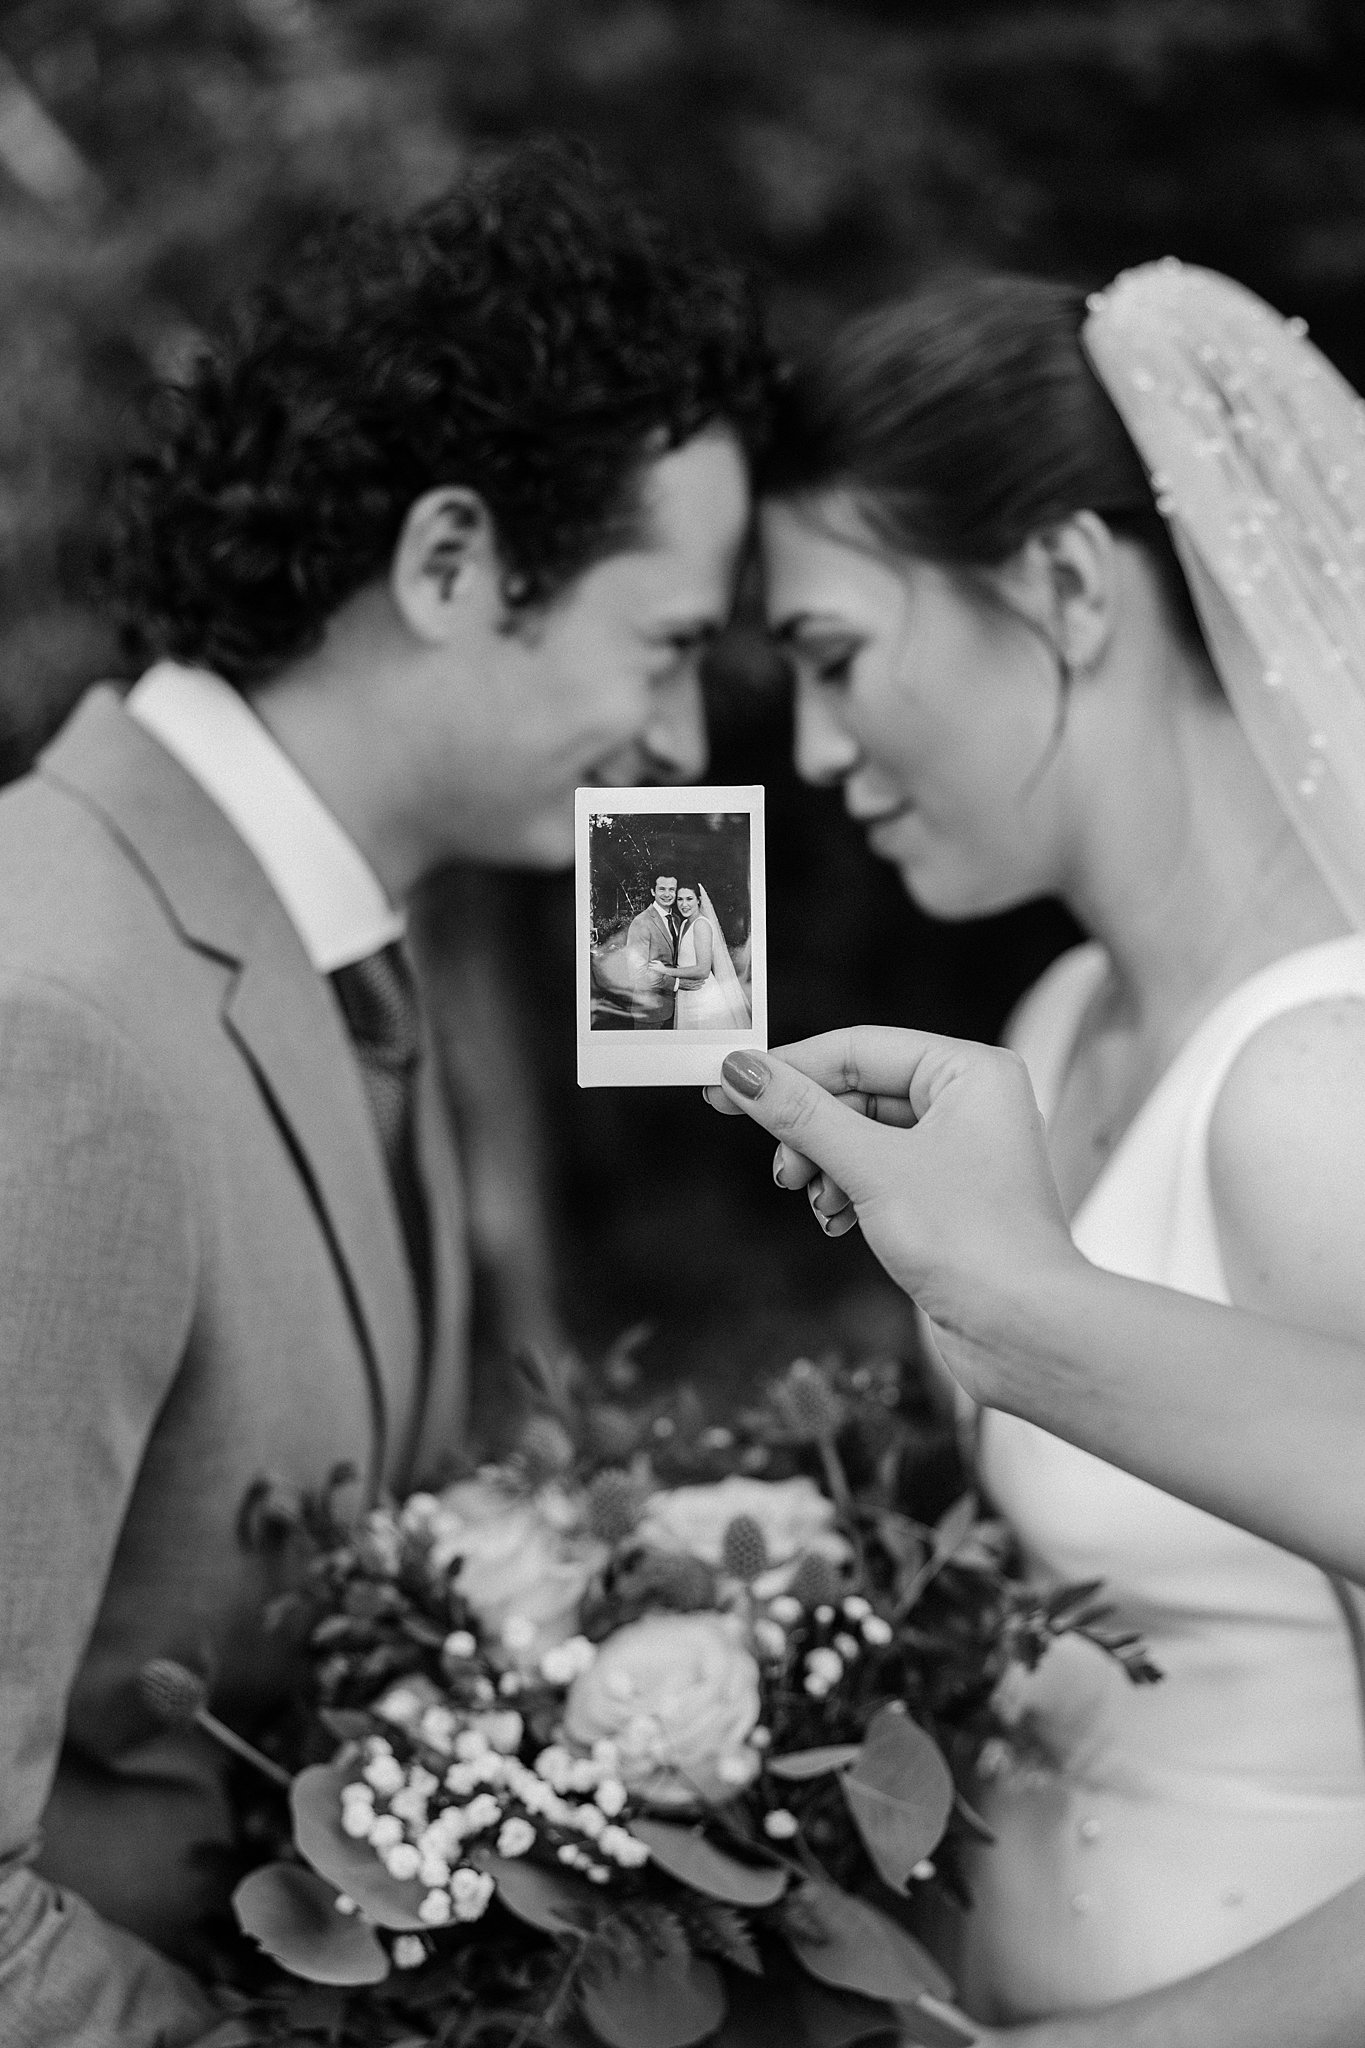 A polaroid is held in front of a newlywed couple touching foreheads of them